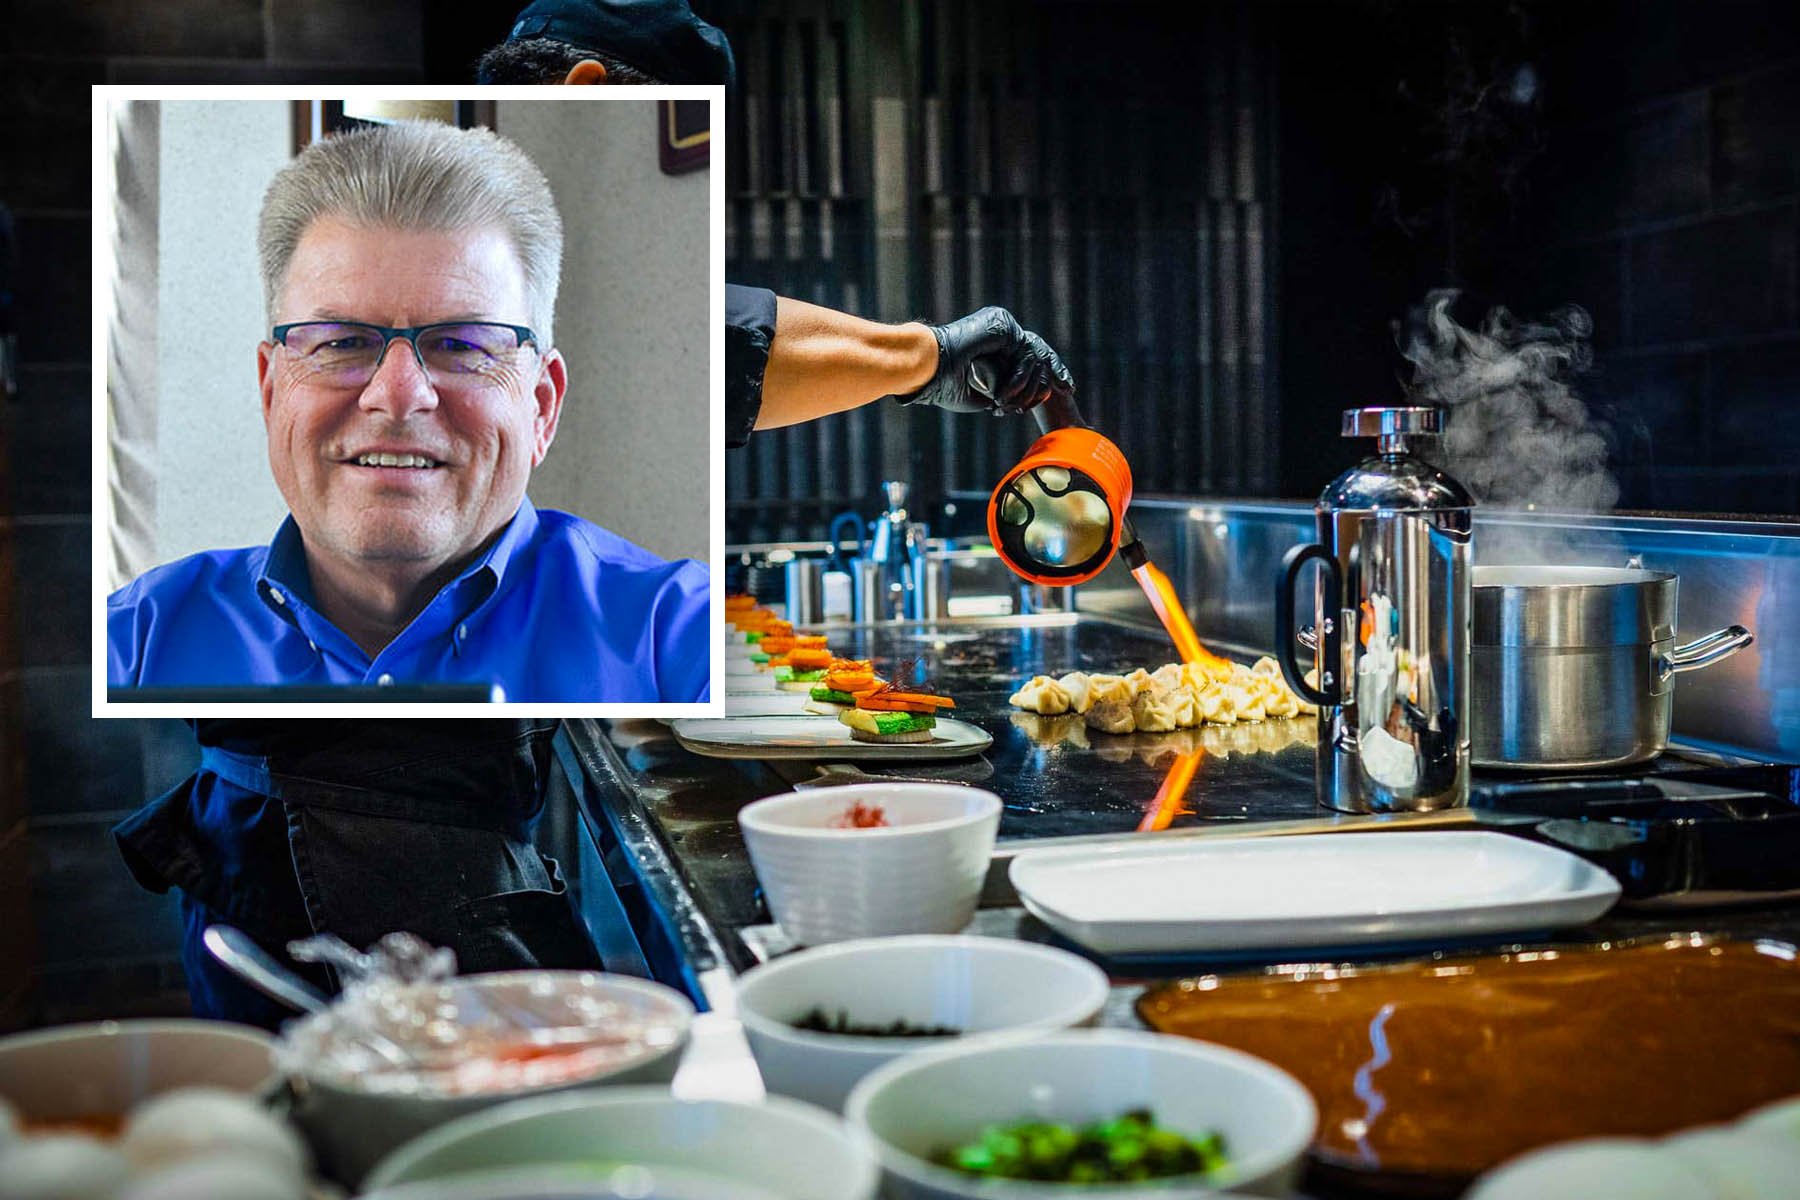 Ed Pecinka Jr. headshot in front of an action shot of a chef flambeing food